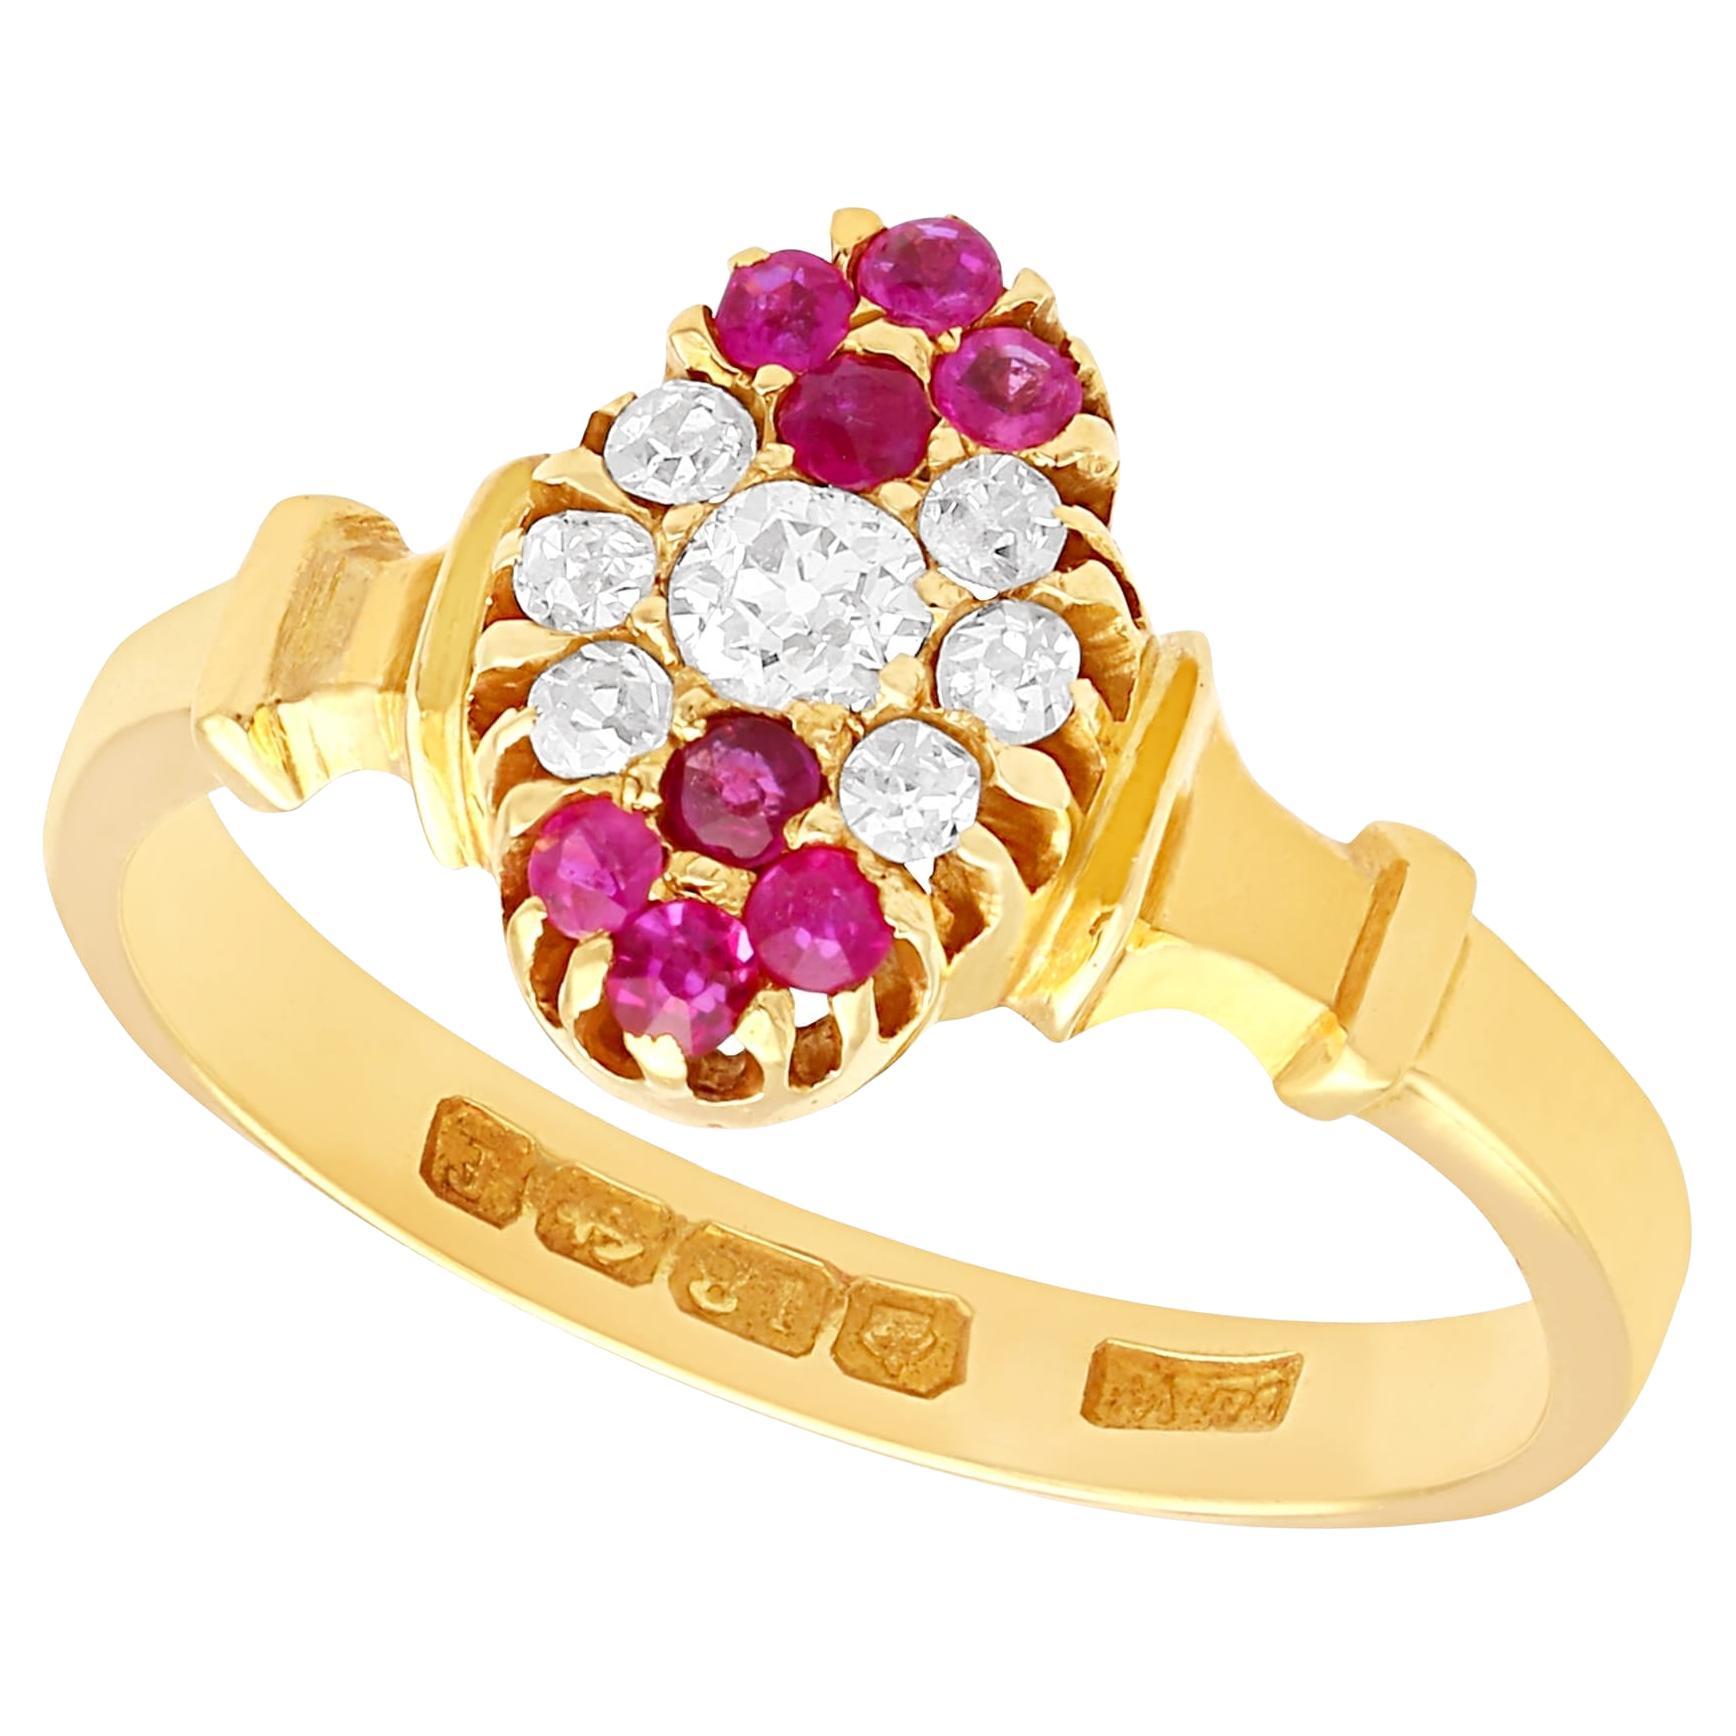 Antique Edwardian 1905 Diamond Ruby Gold Cocktail Ring For Sale